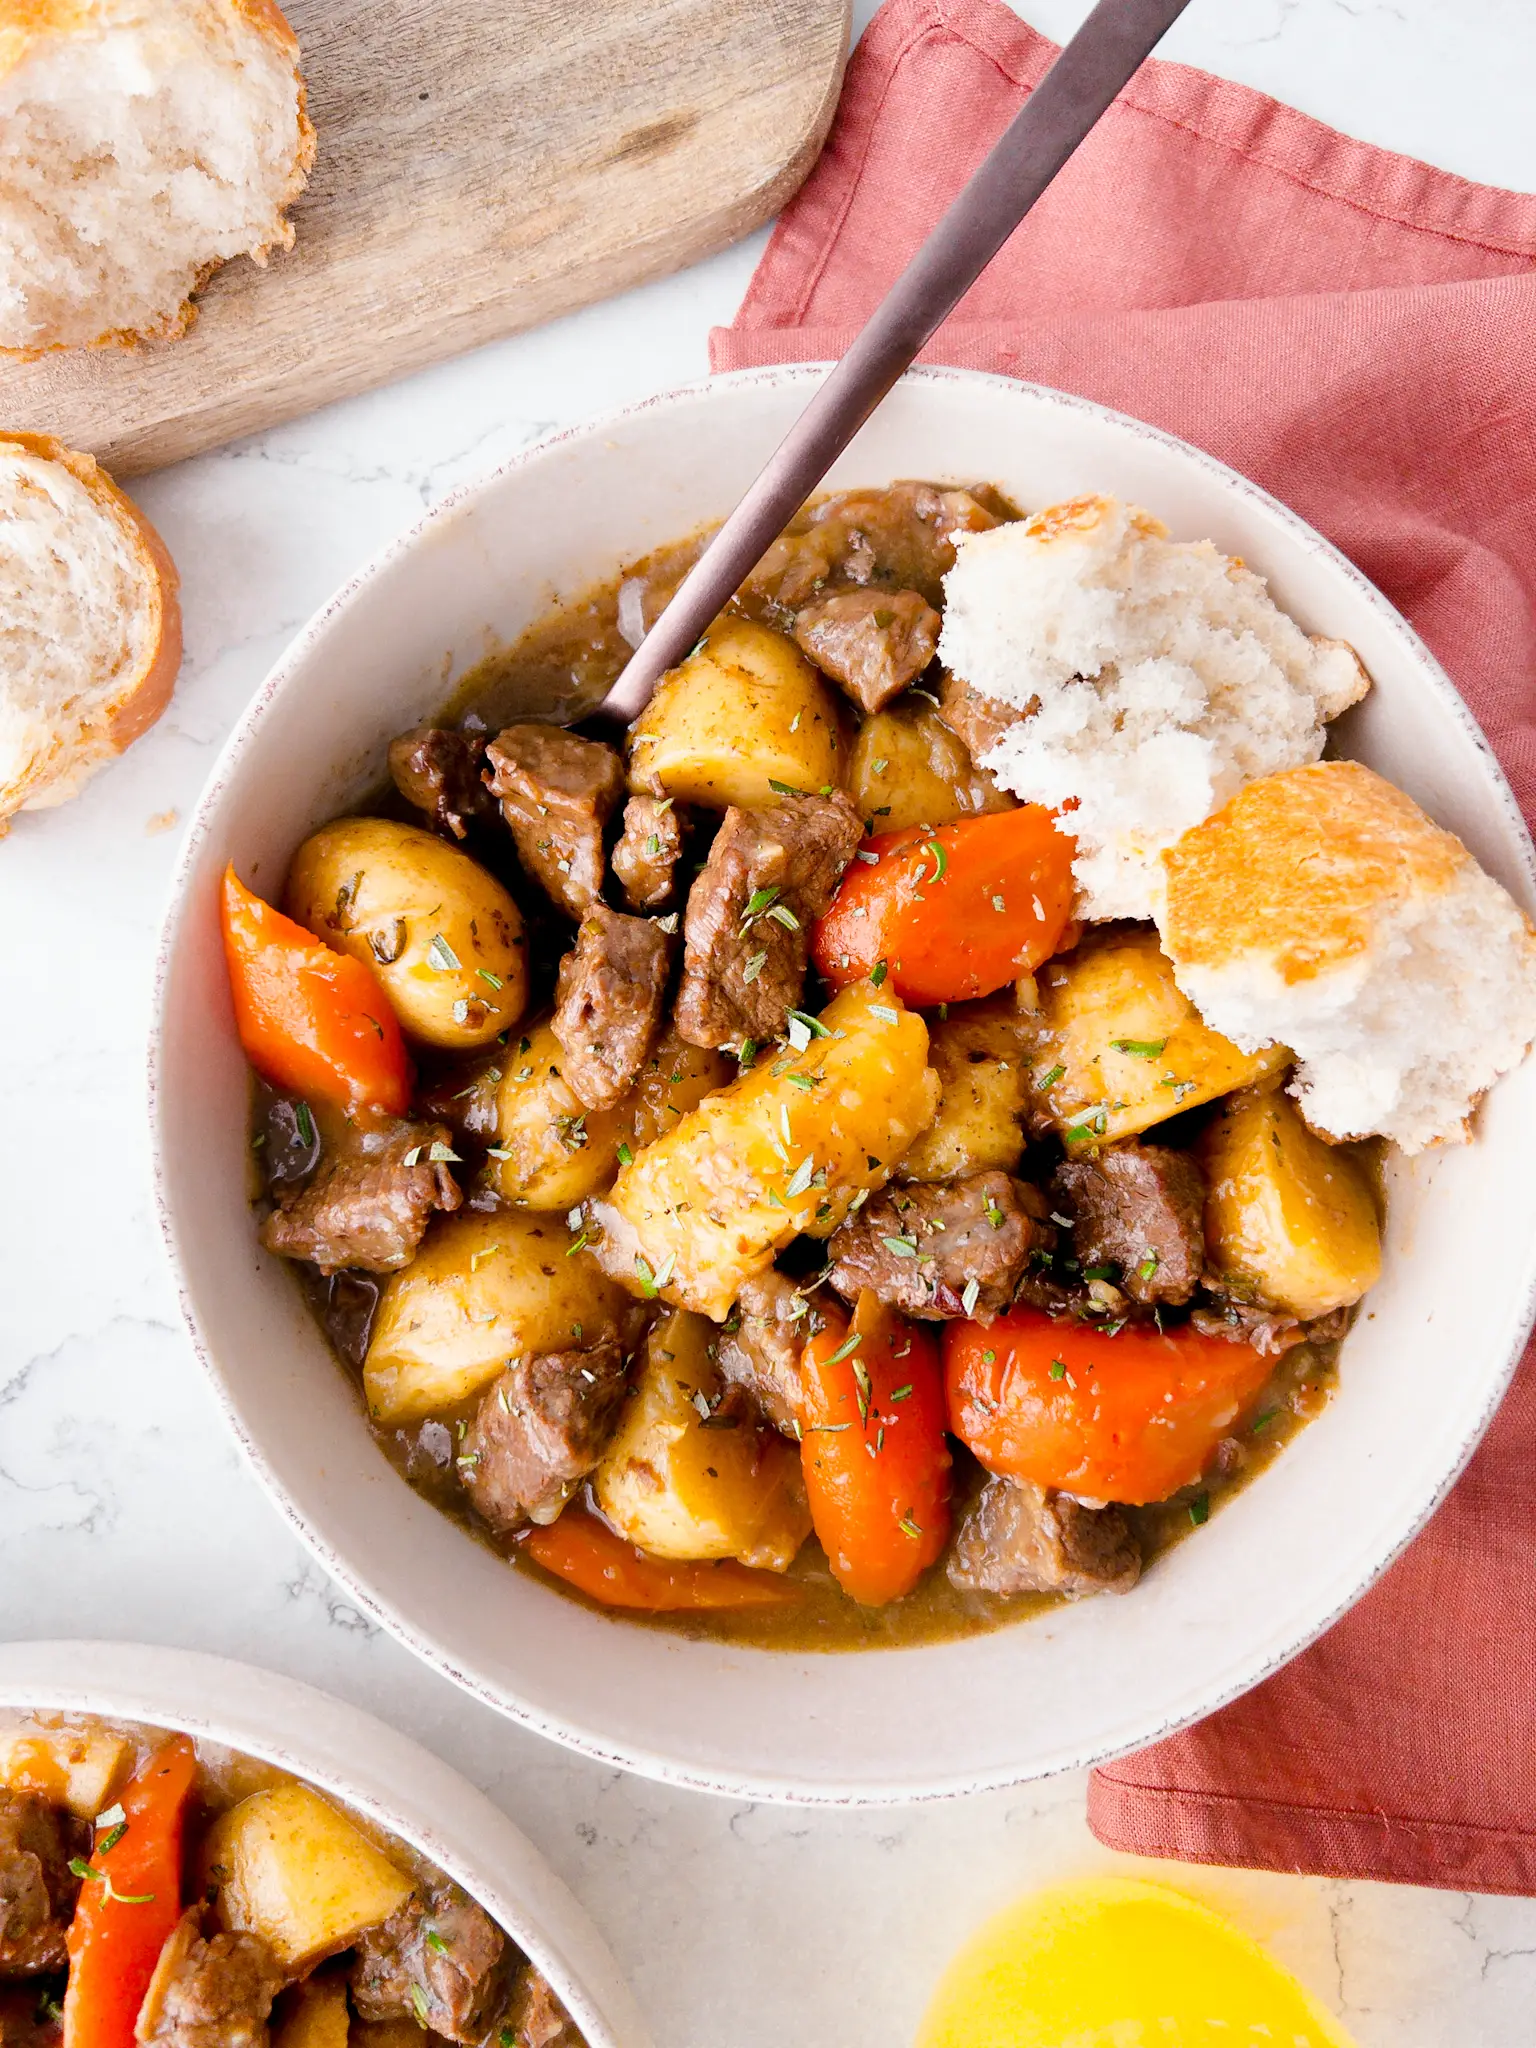 Beef and Plum Casserole - Beef and Plum stew